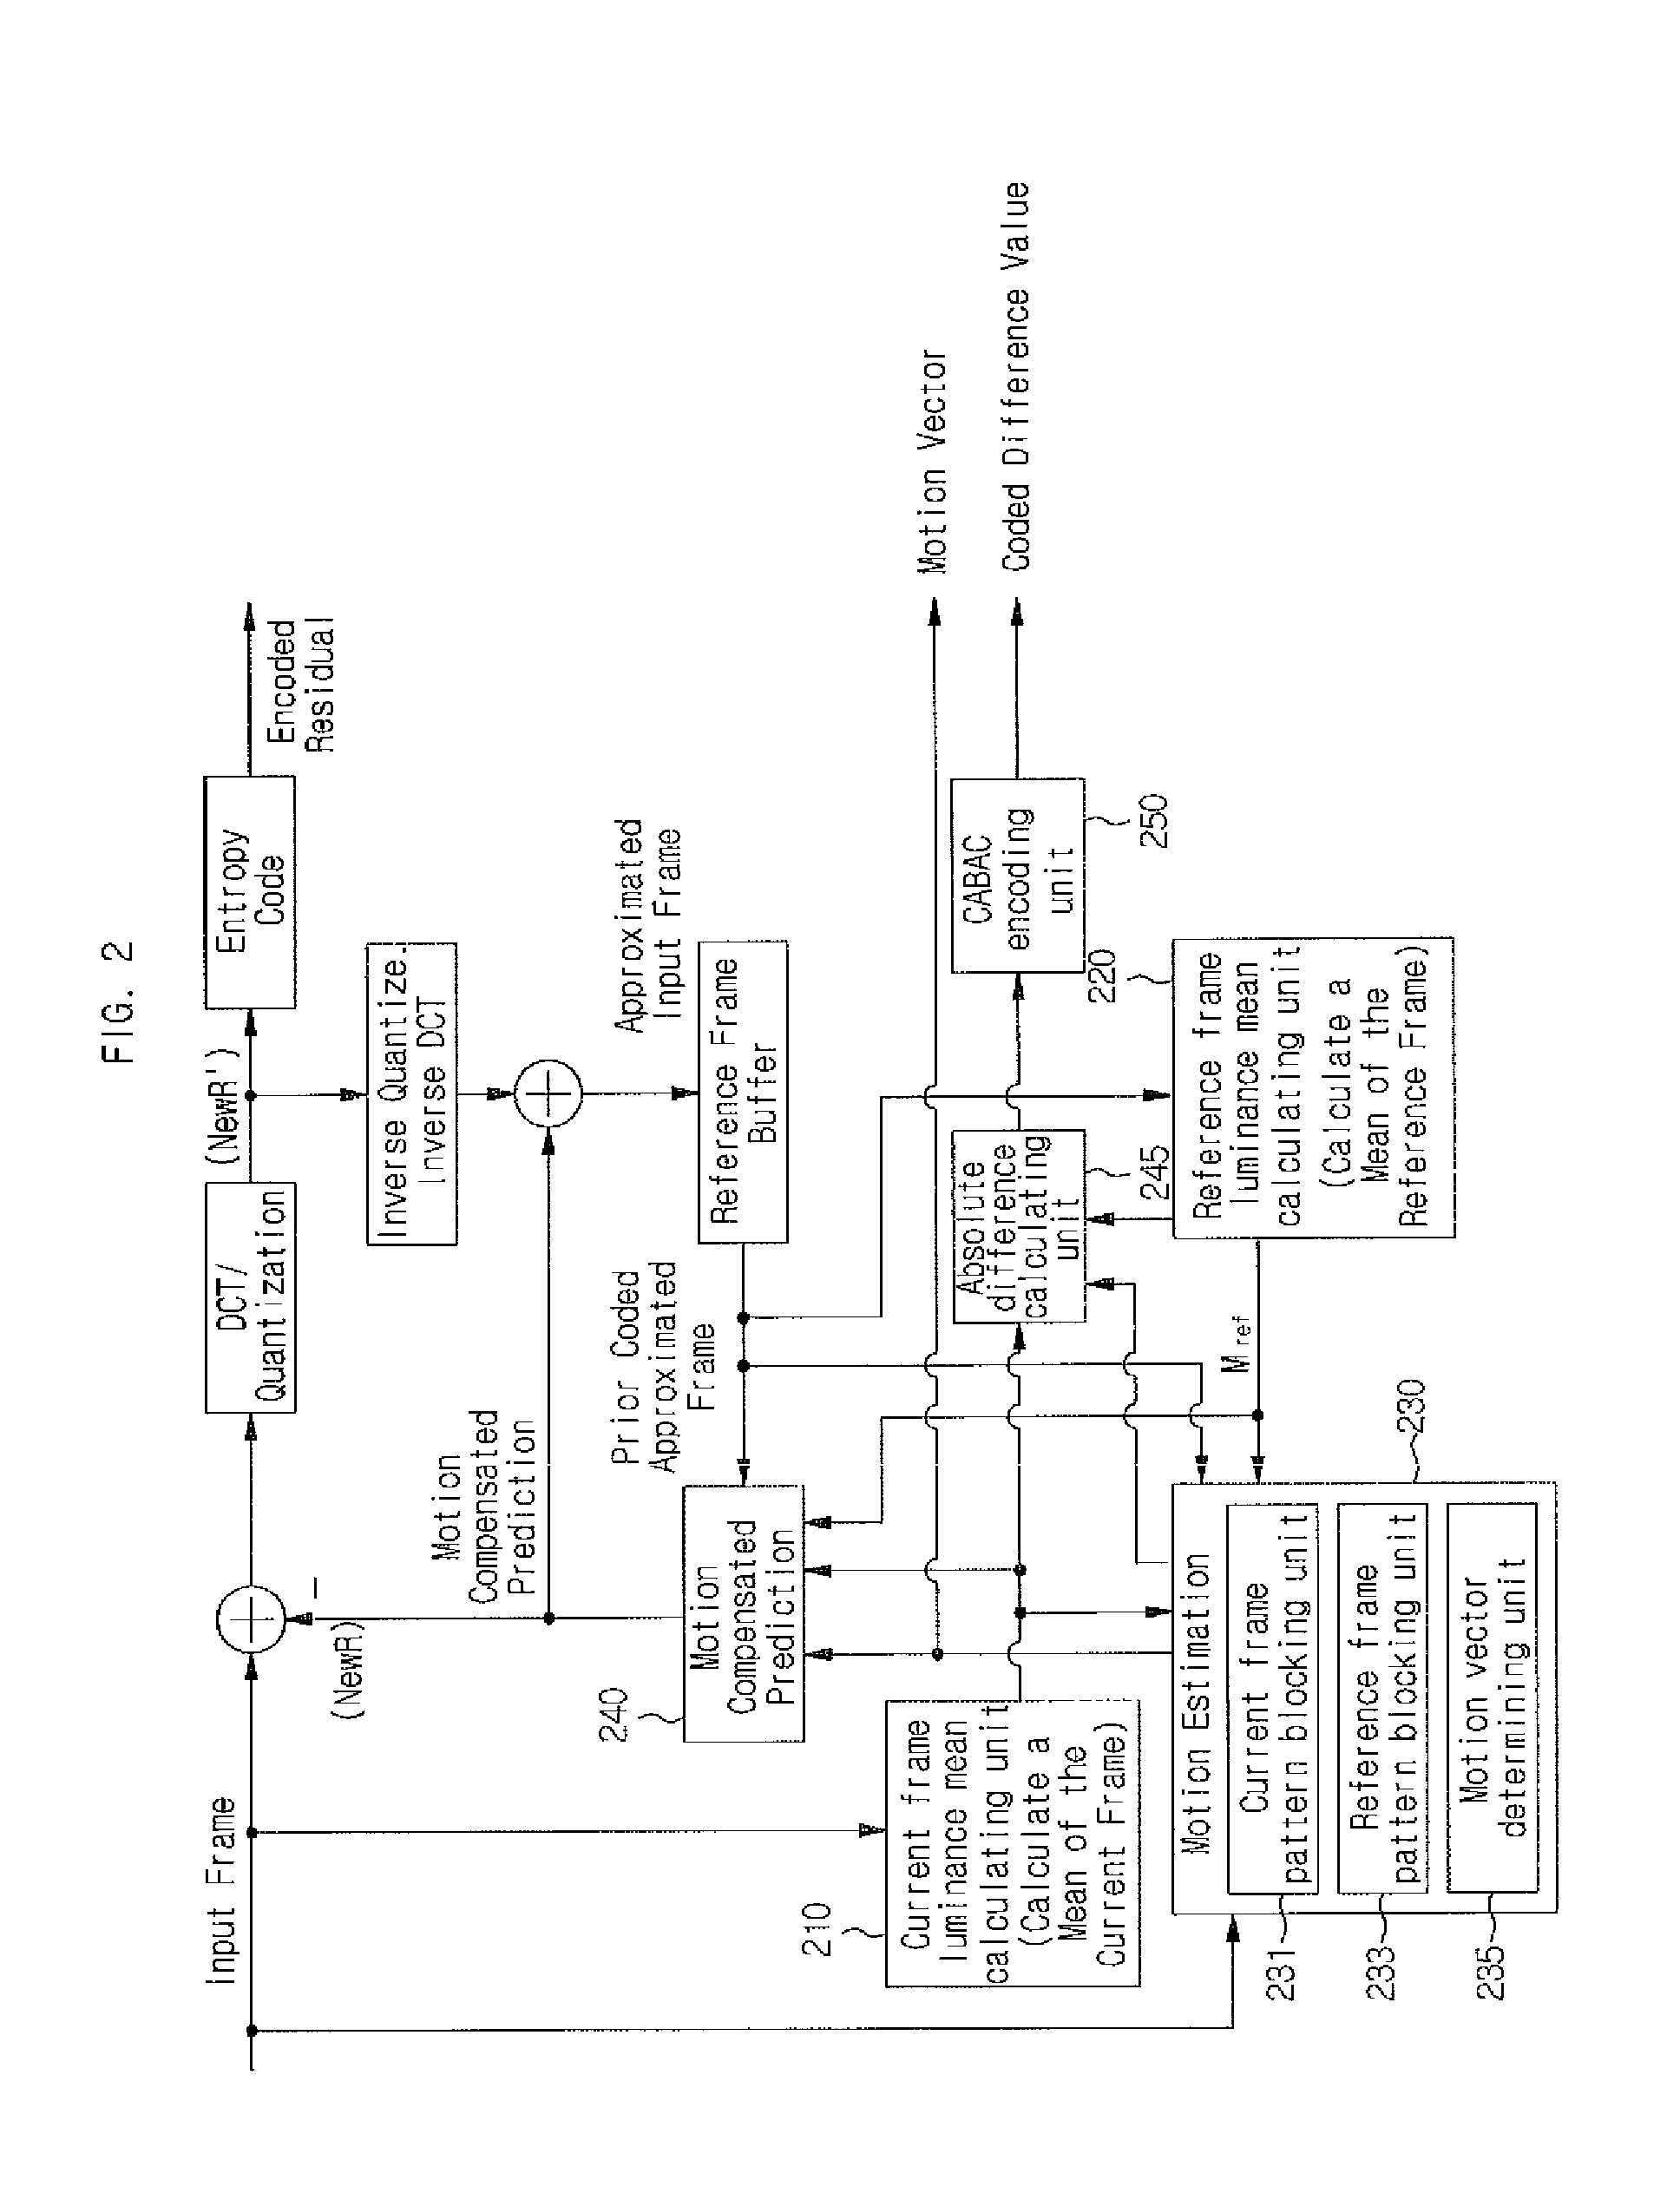 Adaptive motion estimation/compensation device for MB/based illumination change and method thereof